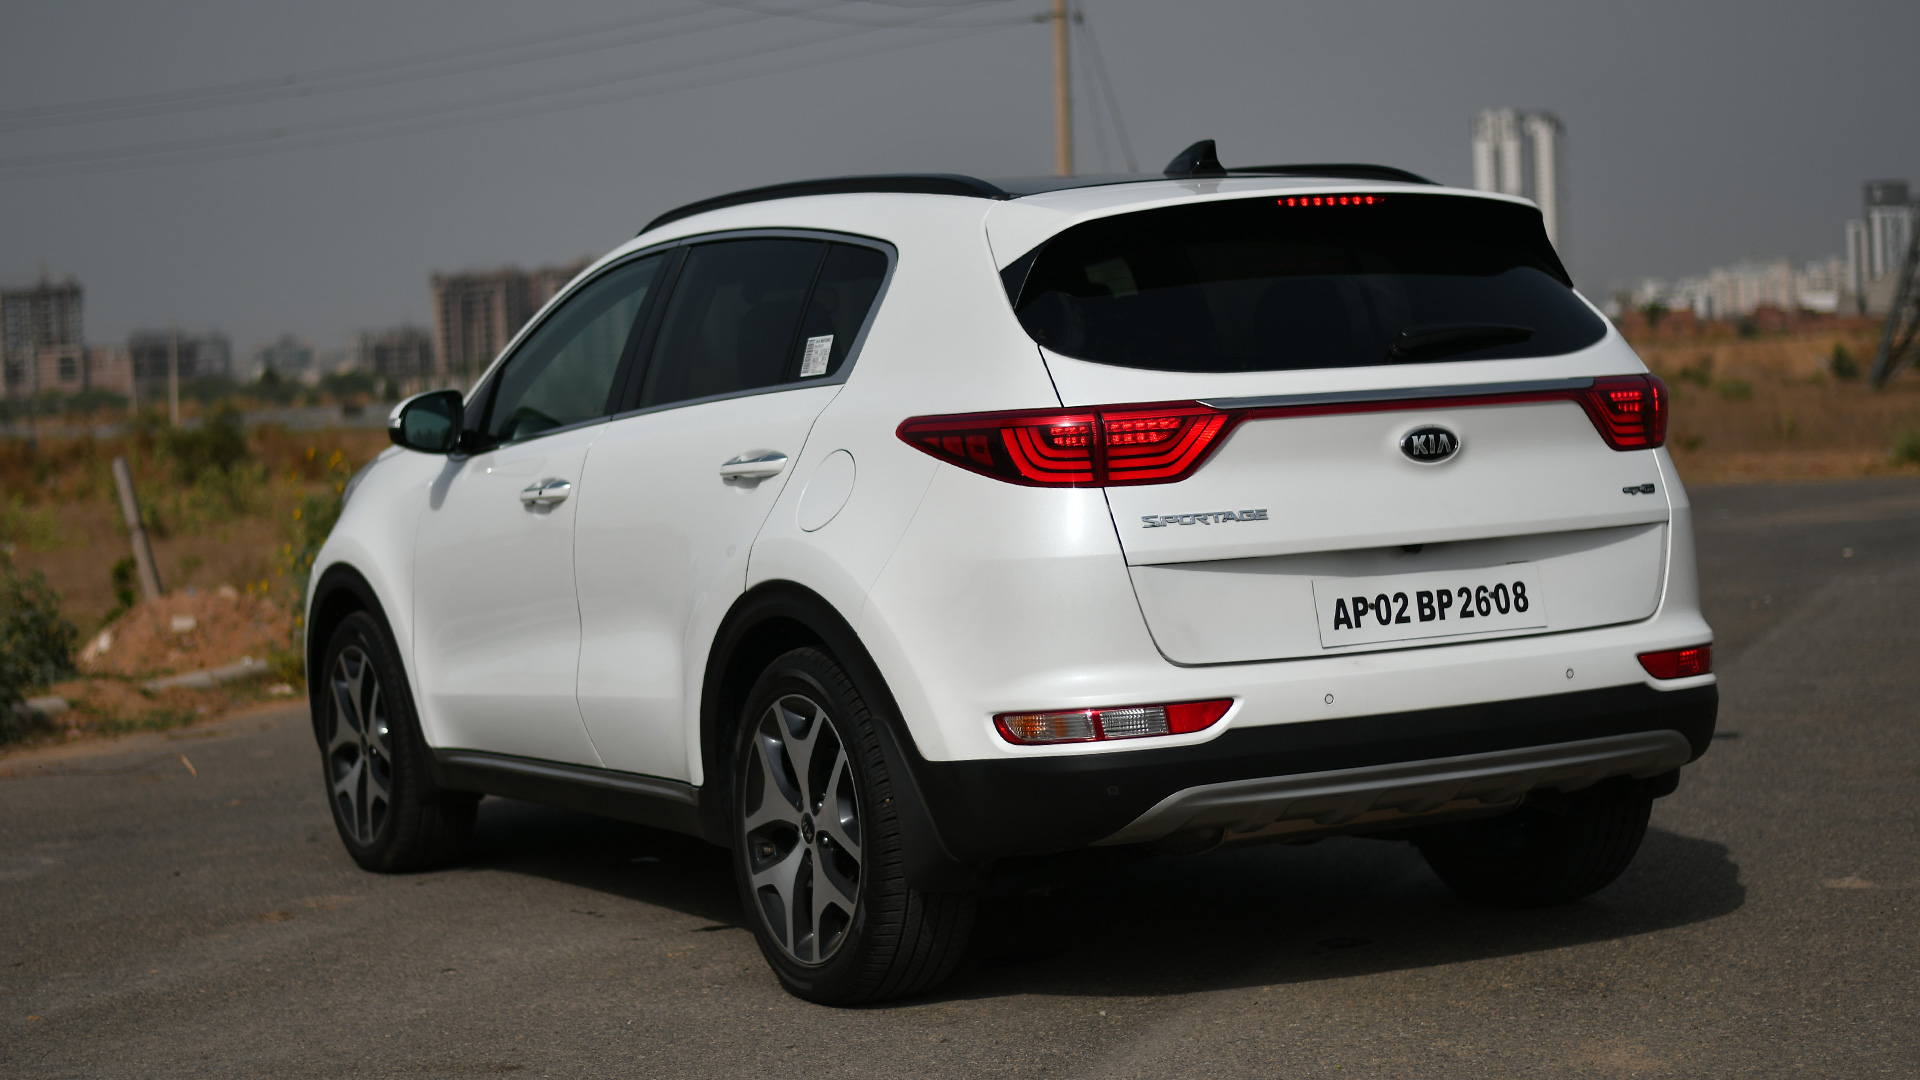 Kia Sportage 2018 - Price in India, Mileage, Reviews, Colours,  Specification, Images - Overdrive